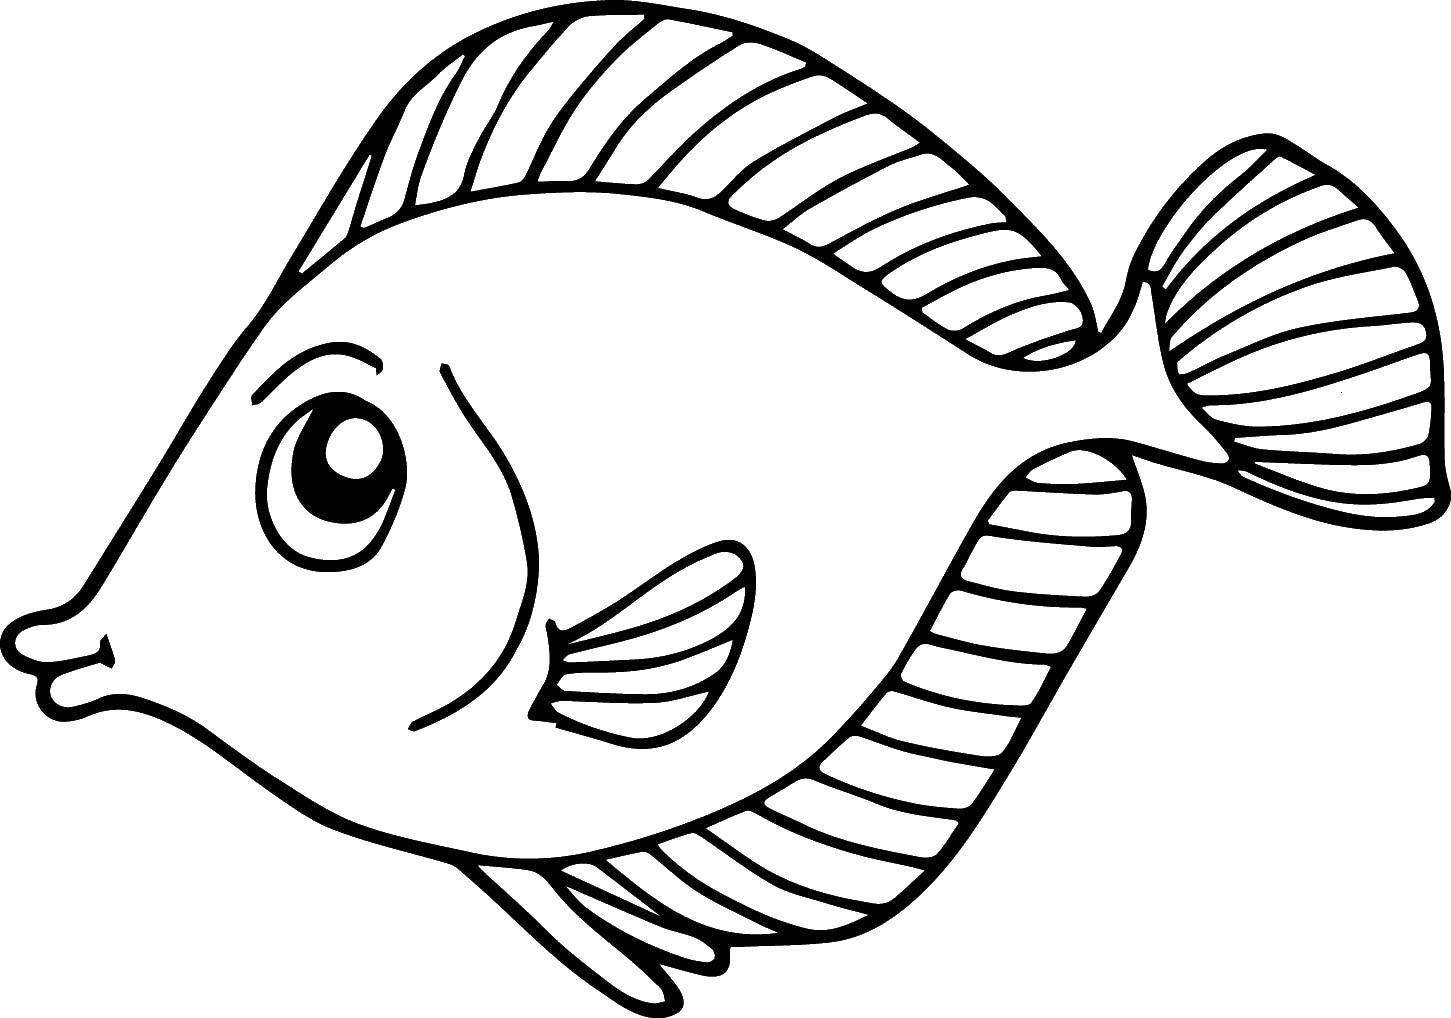 Coloring Neat fish. Category fish. Tags:  Underwater world, fish.